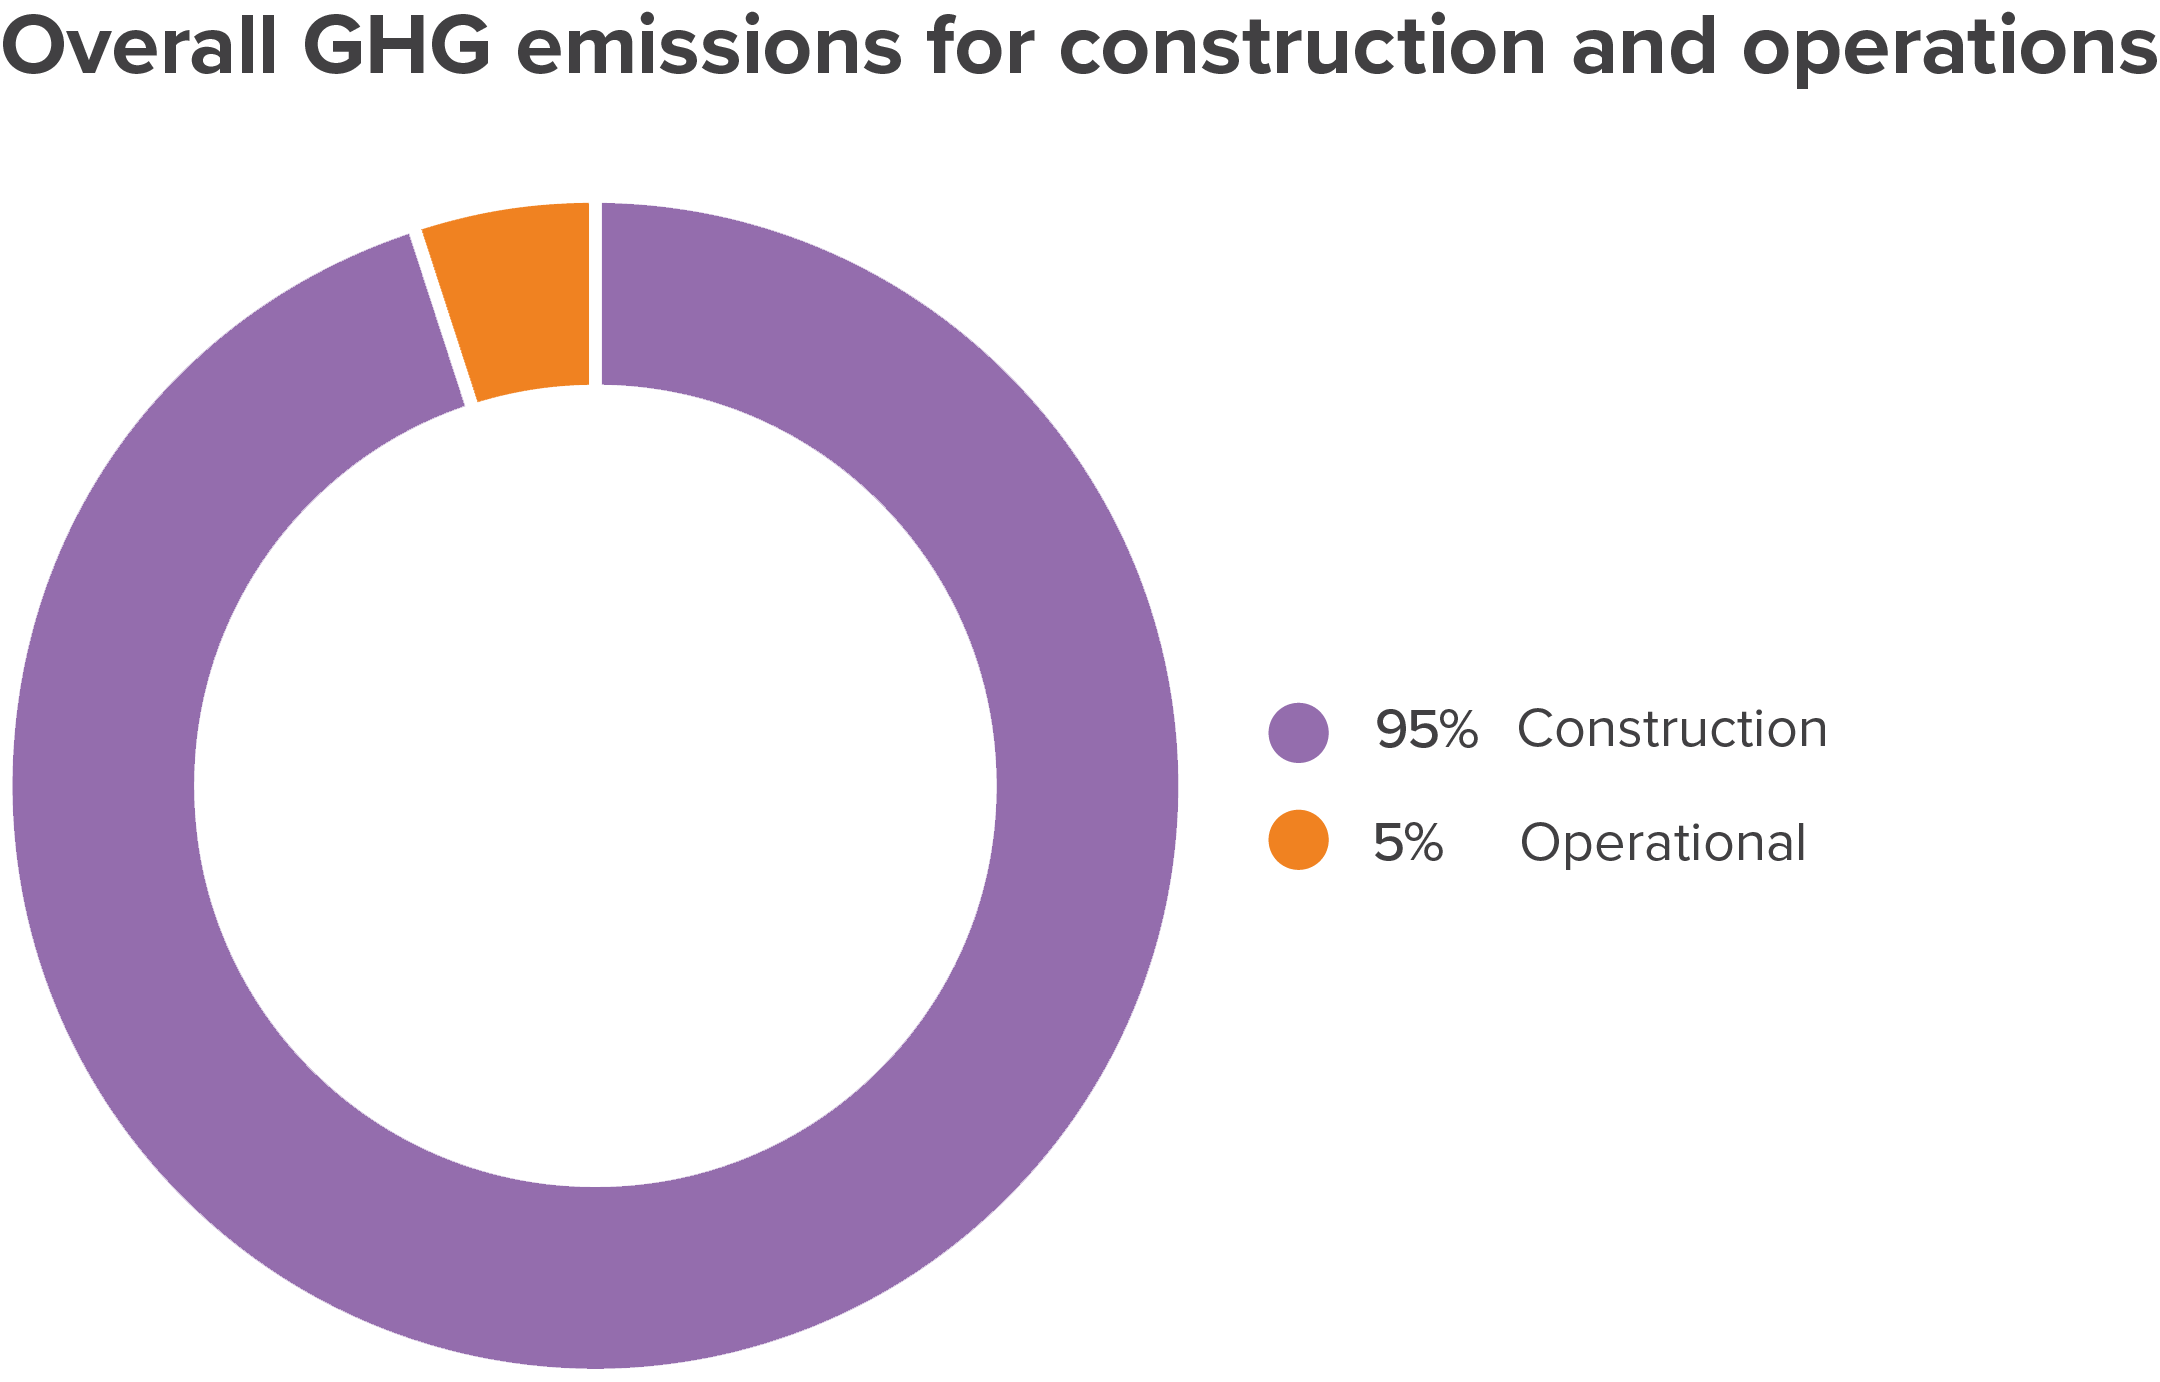 Overall GHG emissions for construction and operations; 95% Construction, 5% Operational.